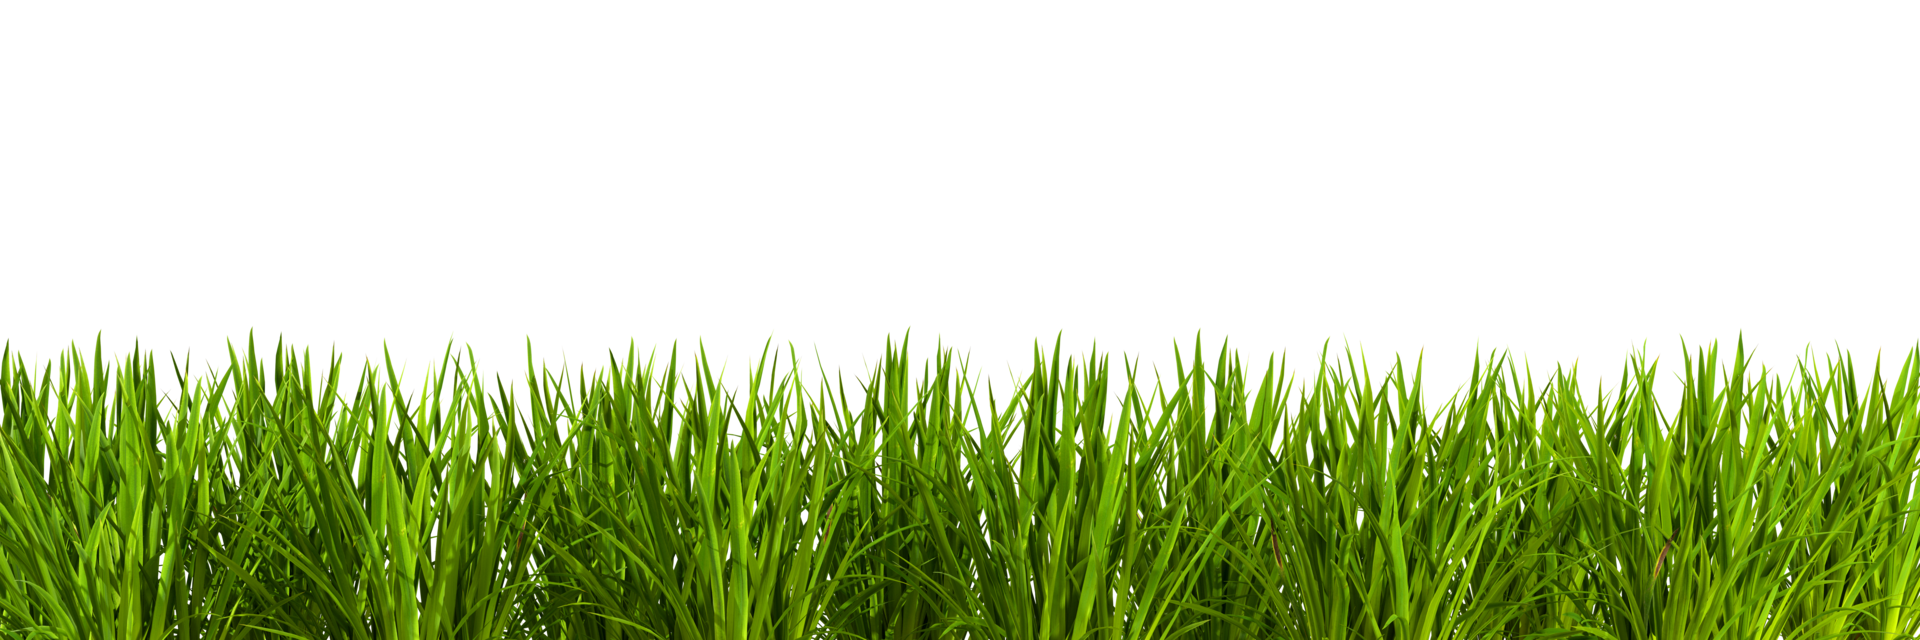 Greenery nature grass meadow landscaping cut out transparent backgrounds 3d rendering file png